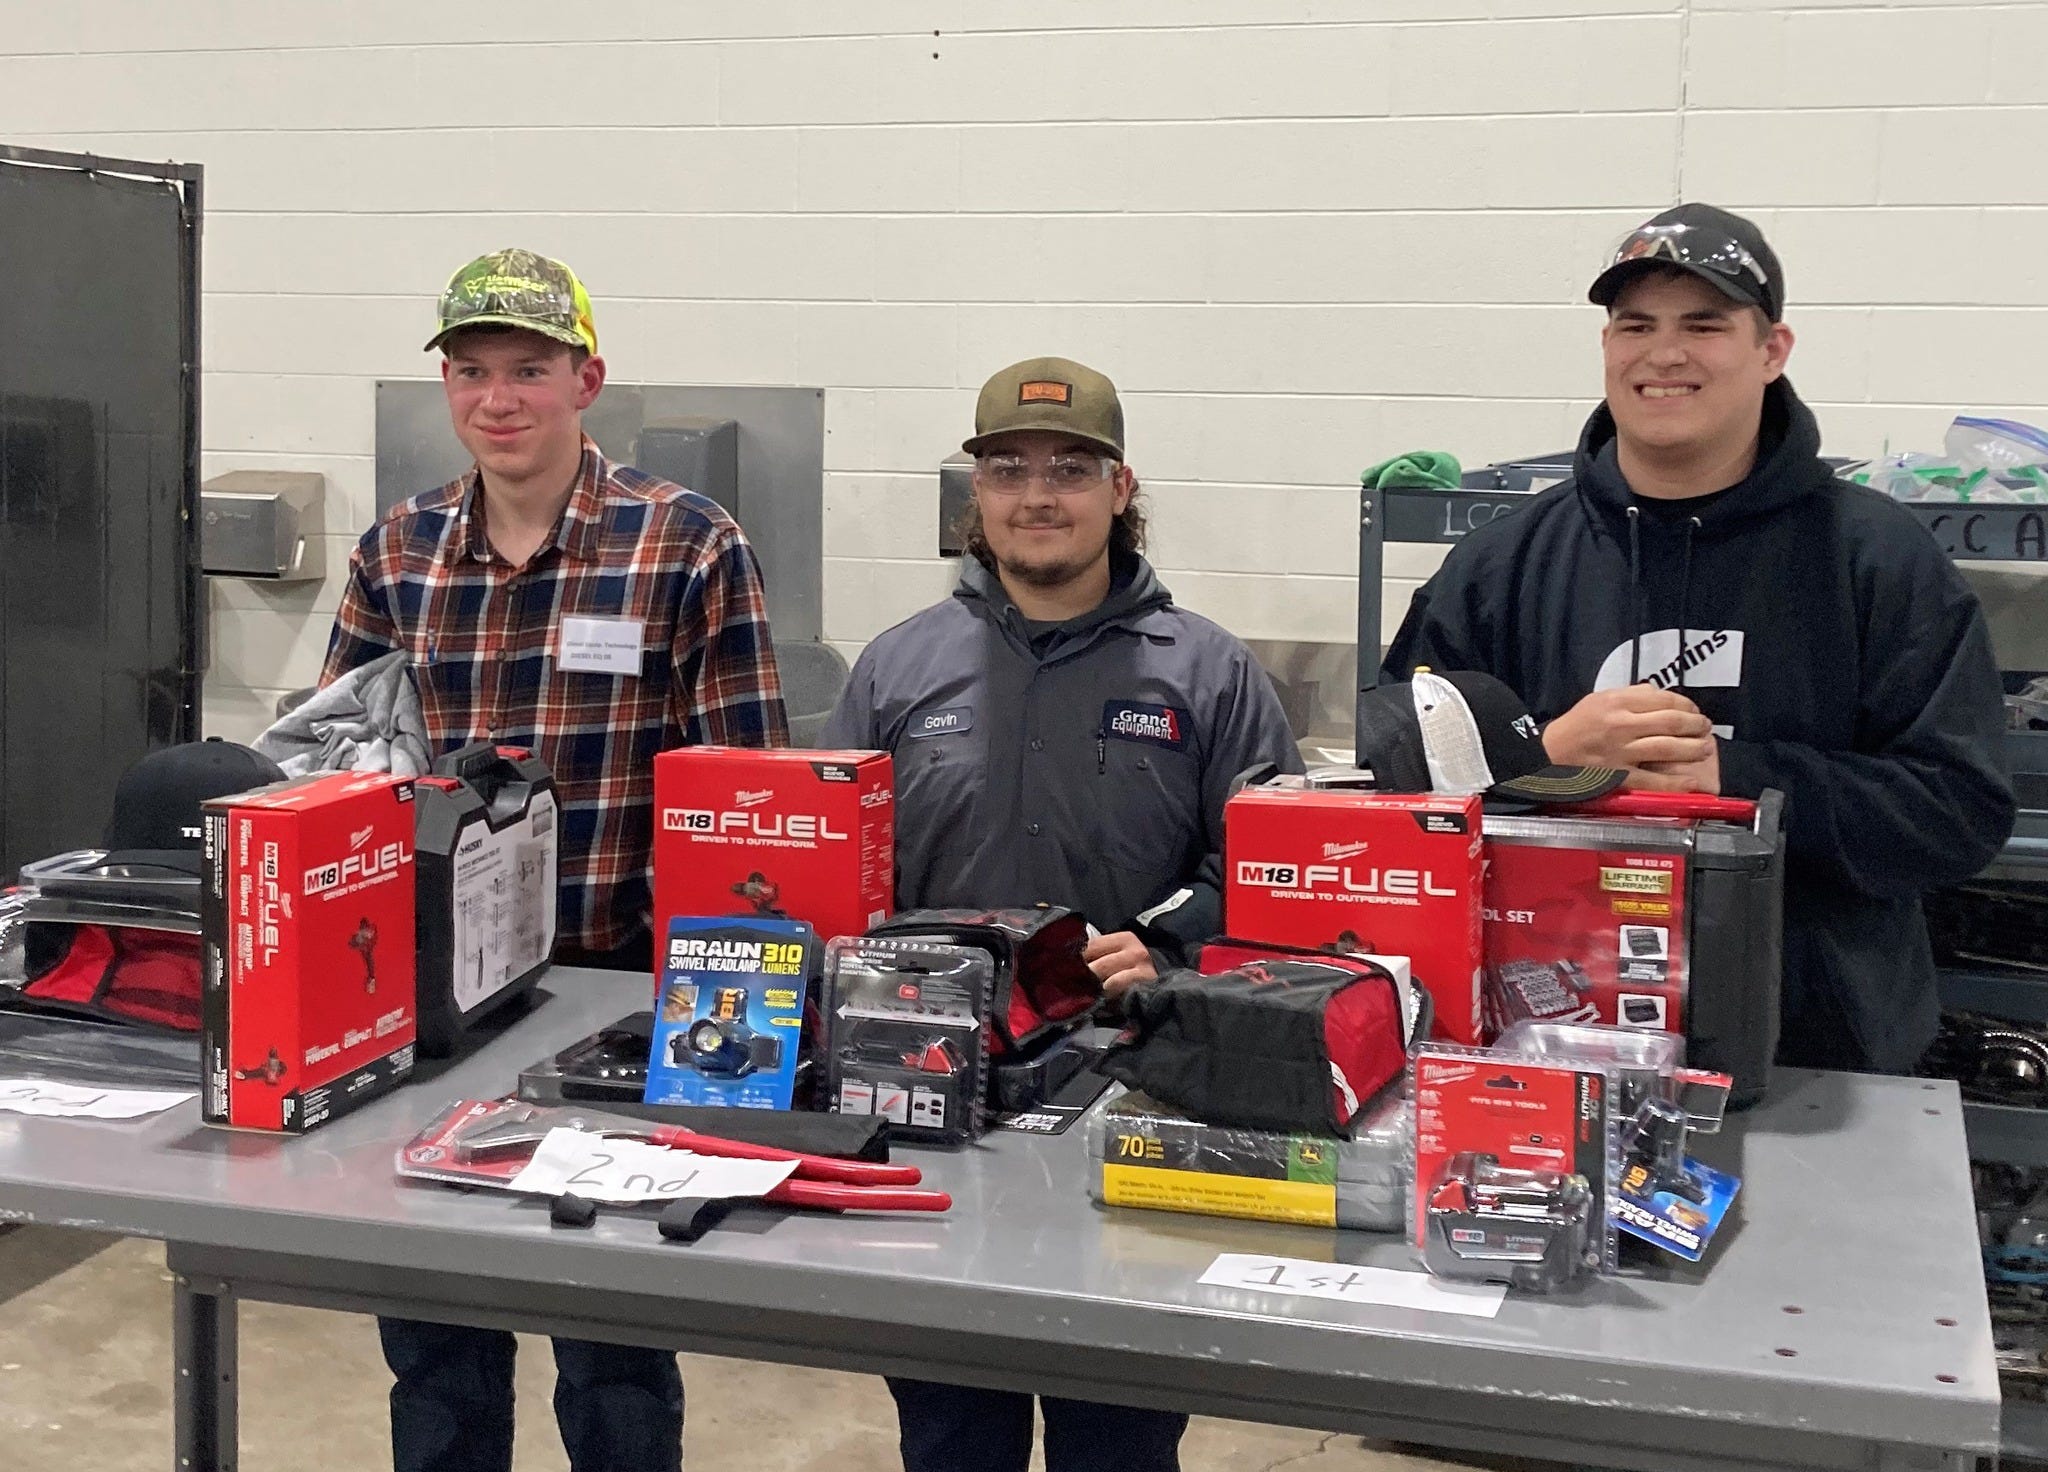 Students from Careerline Tech Center show outstanding performance in diesel technology competition